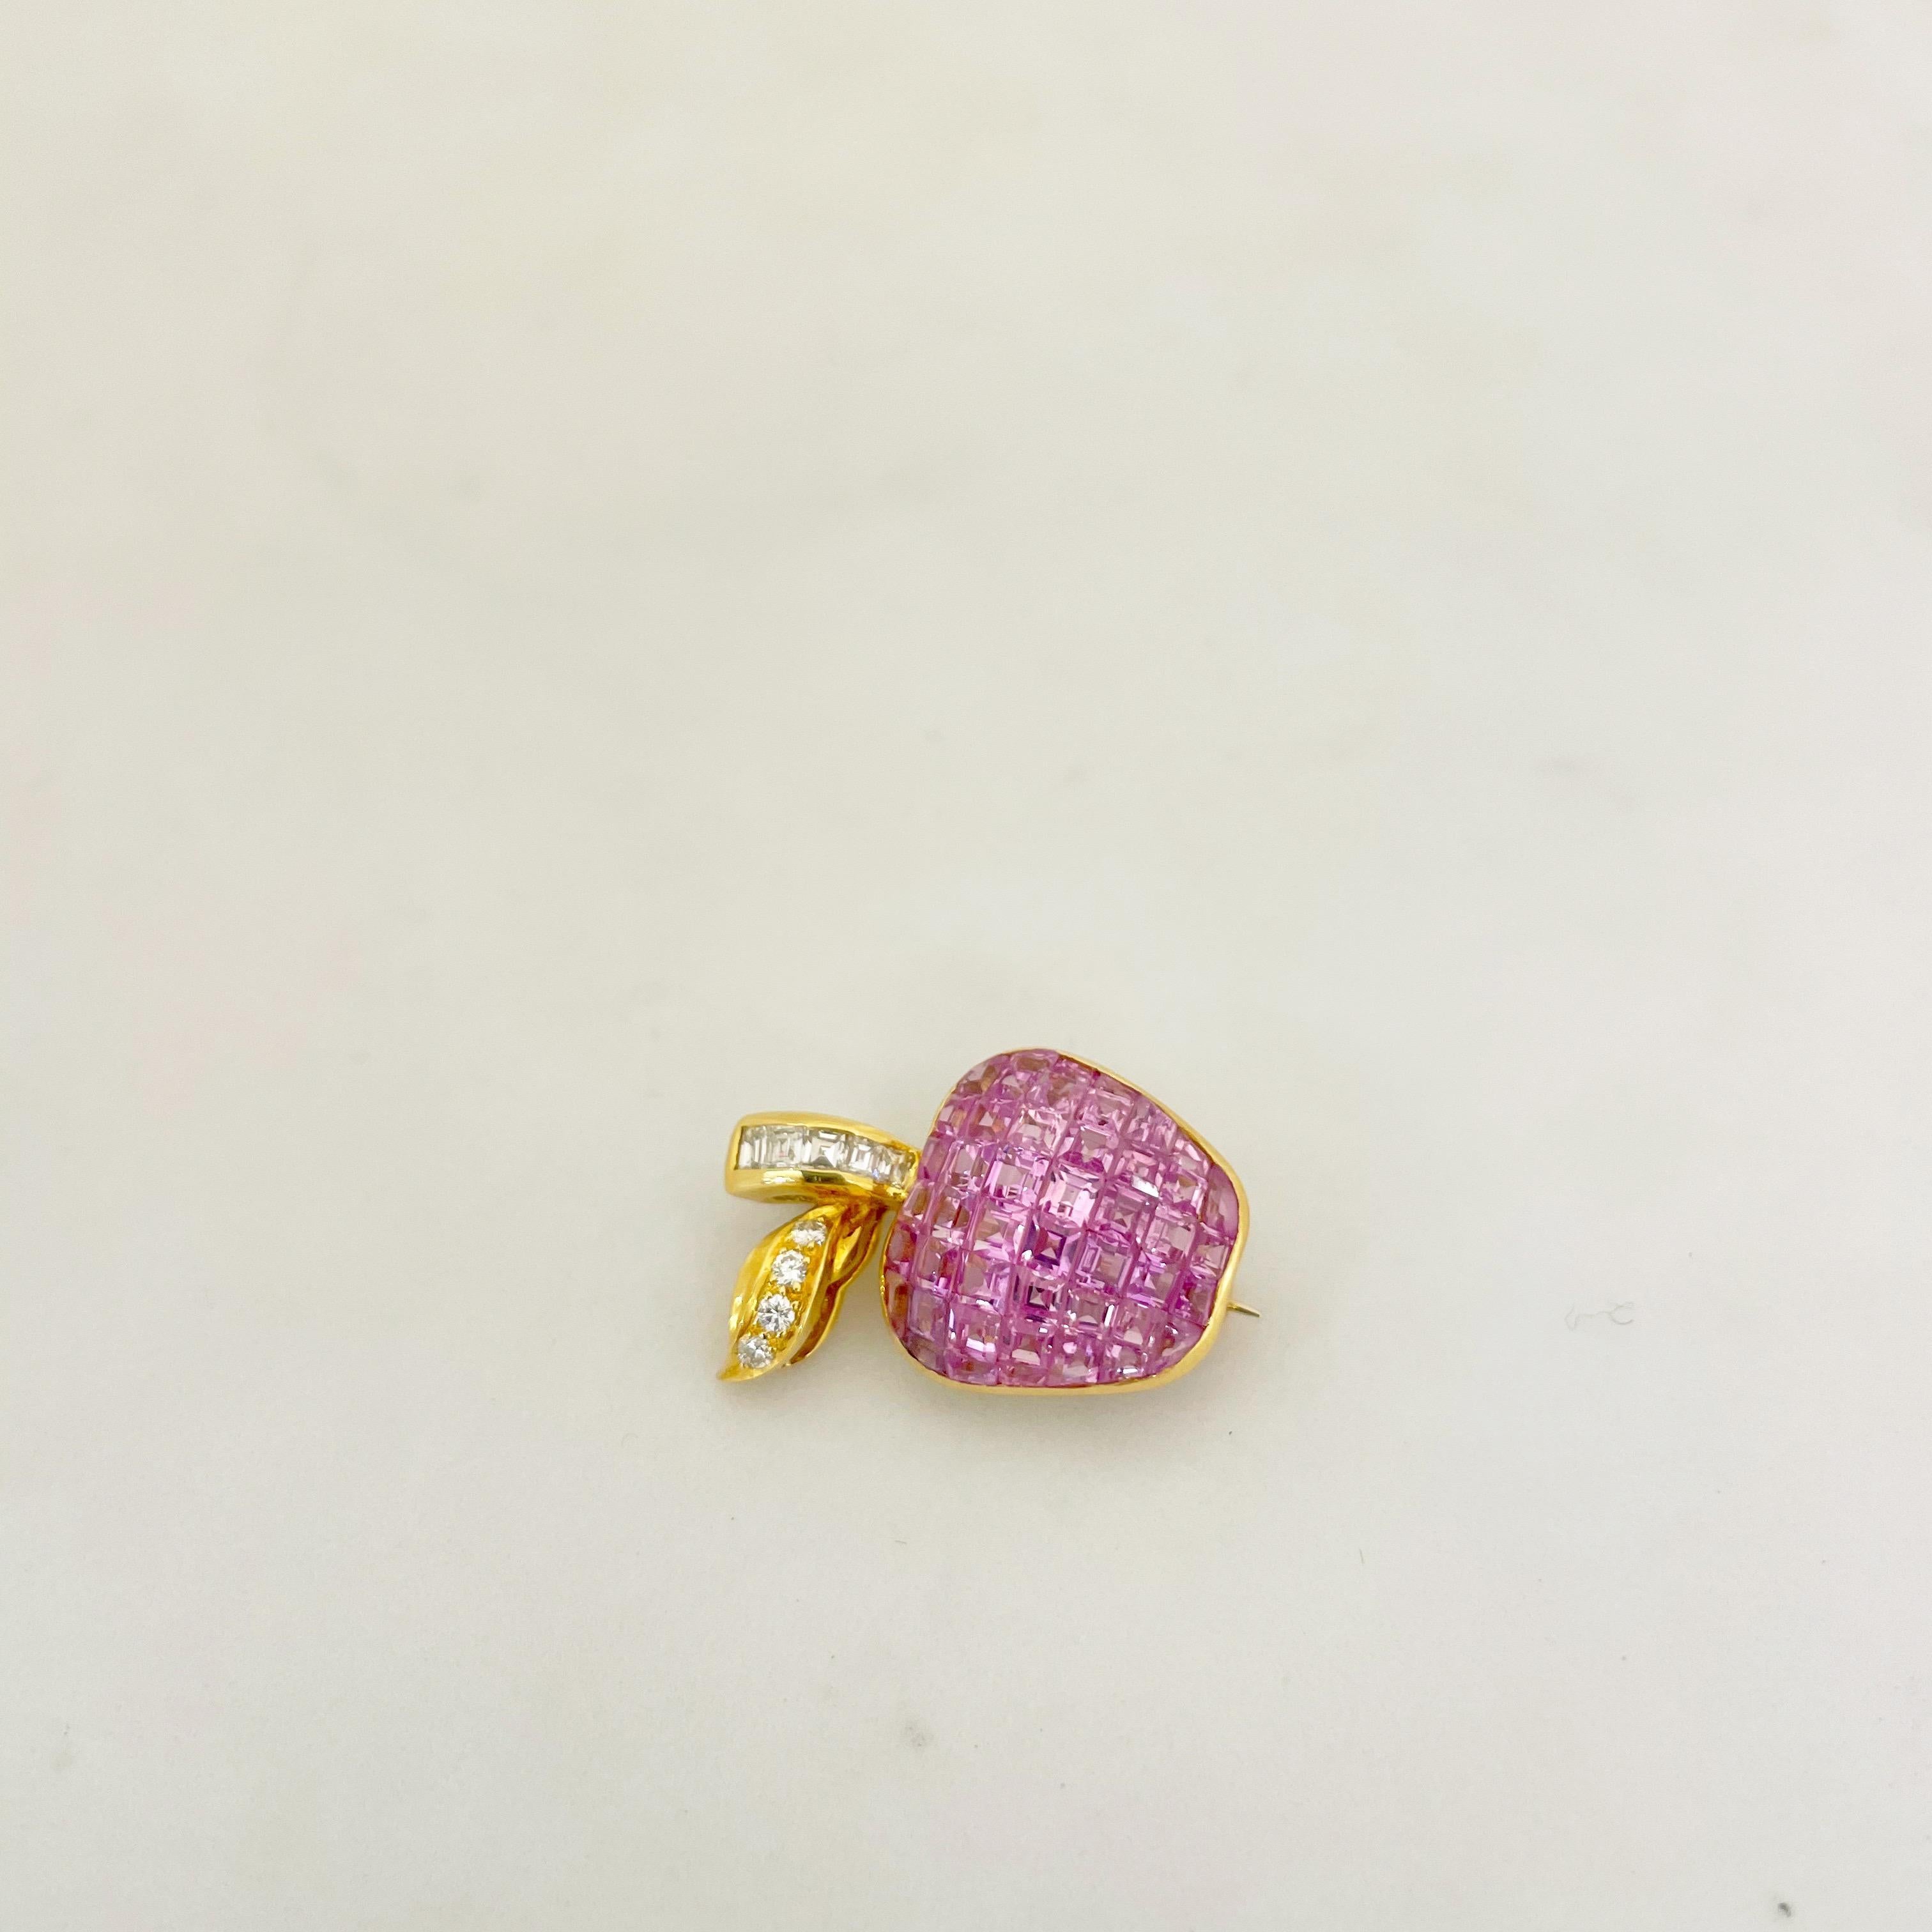 Contemporary Cellini 18 Karat Gold, 7.55 Carat Invisibly Set Pink Sapphire Apple Brooch For Sale